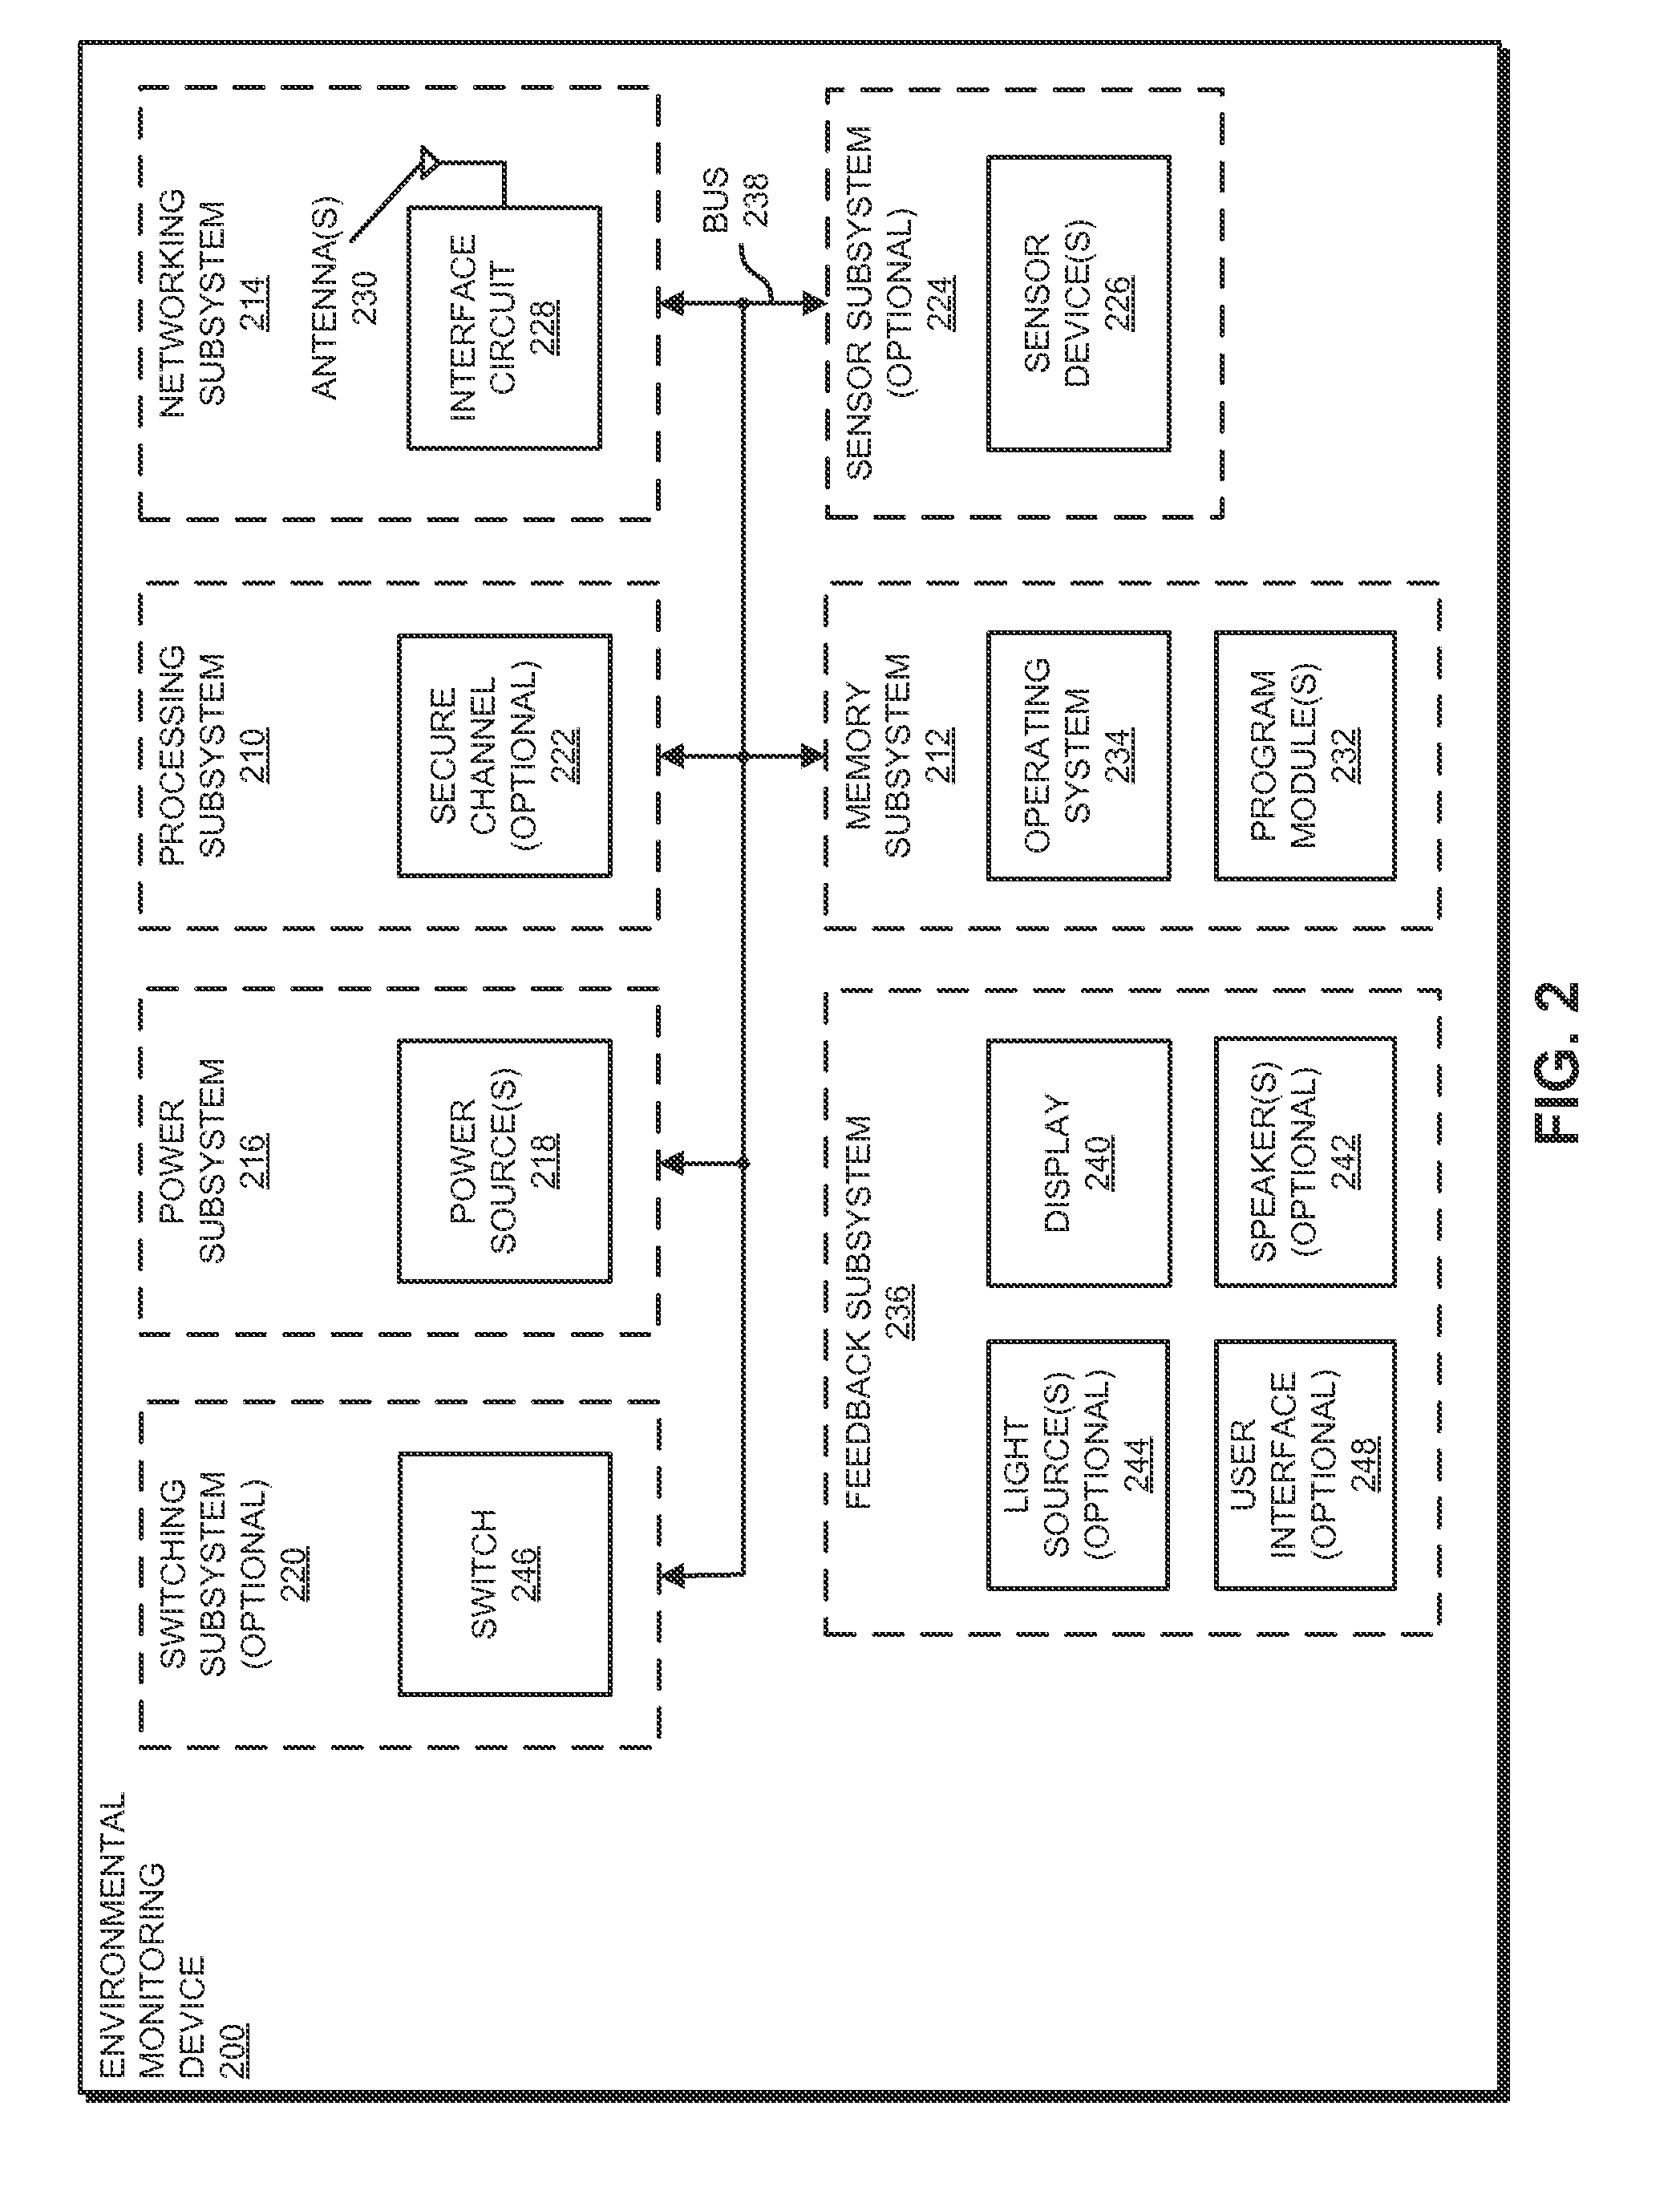 Environmental monitoring device with event-driven service